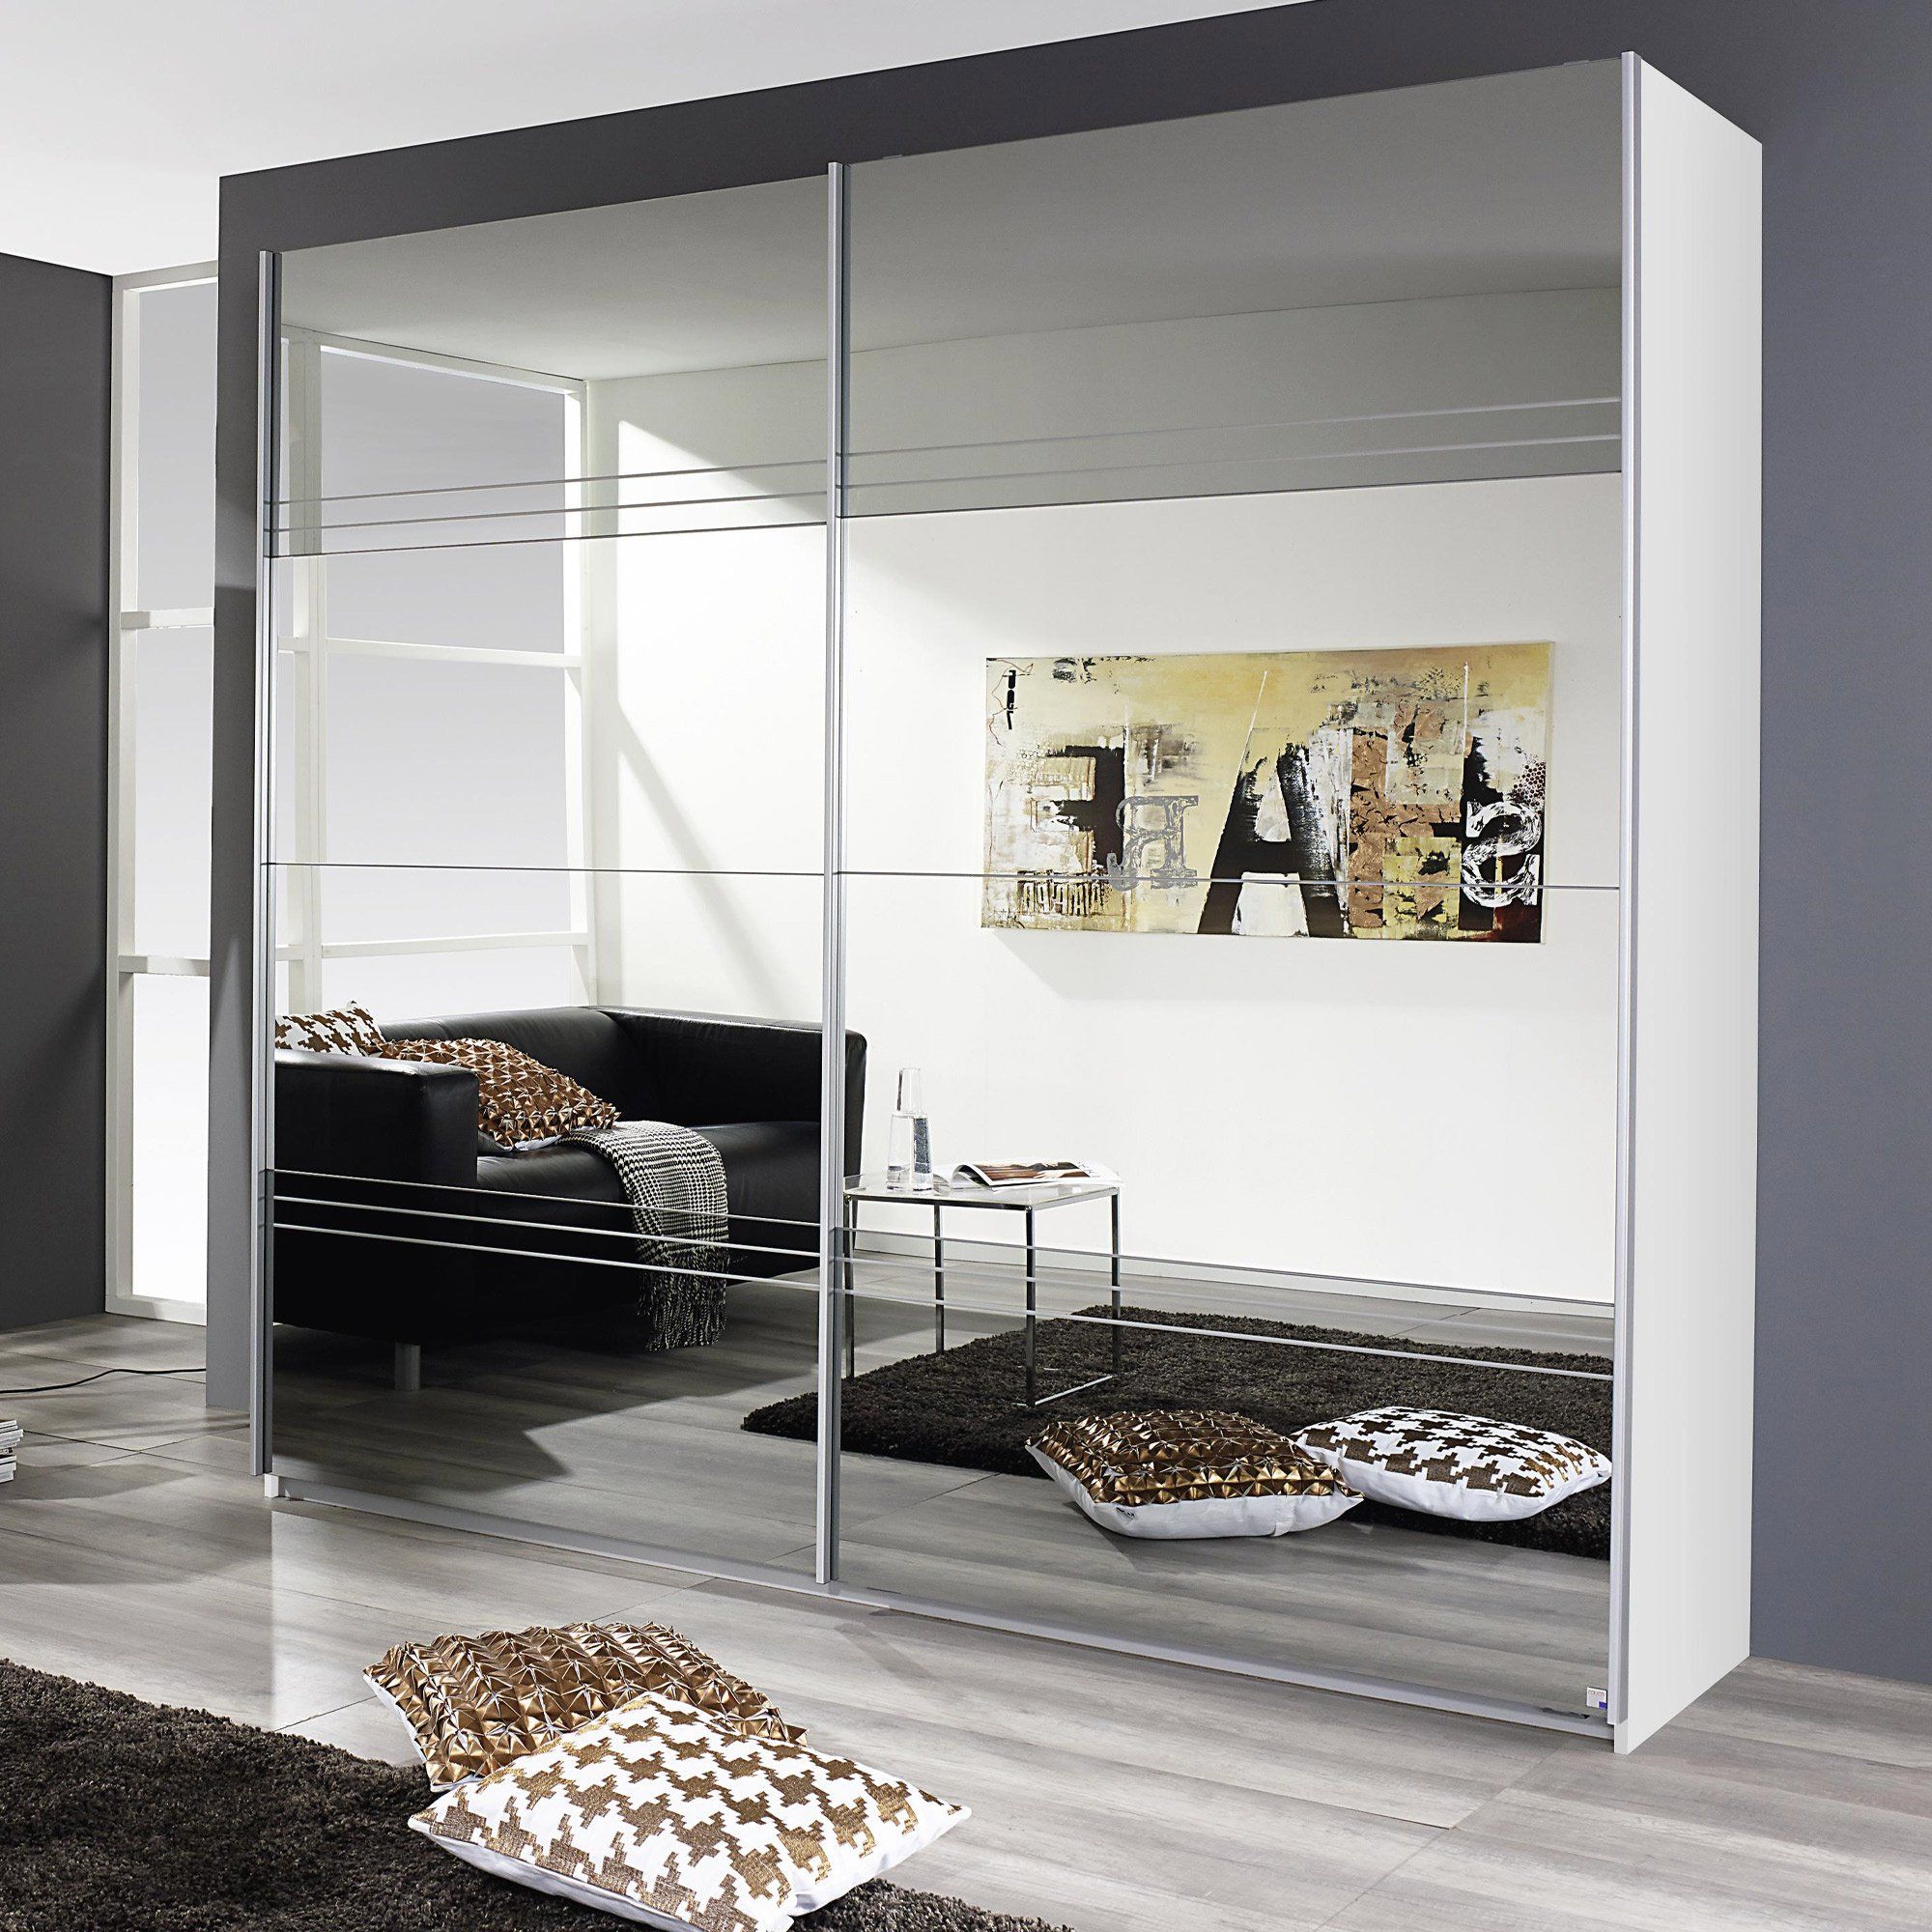 White Cleo Mirrored Door Gliding Door Wardrobe Intended For Mirrored Wardrobes (View 3 of 15)